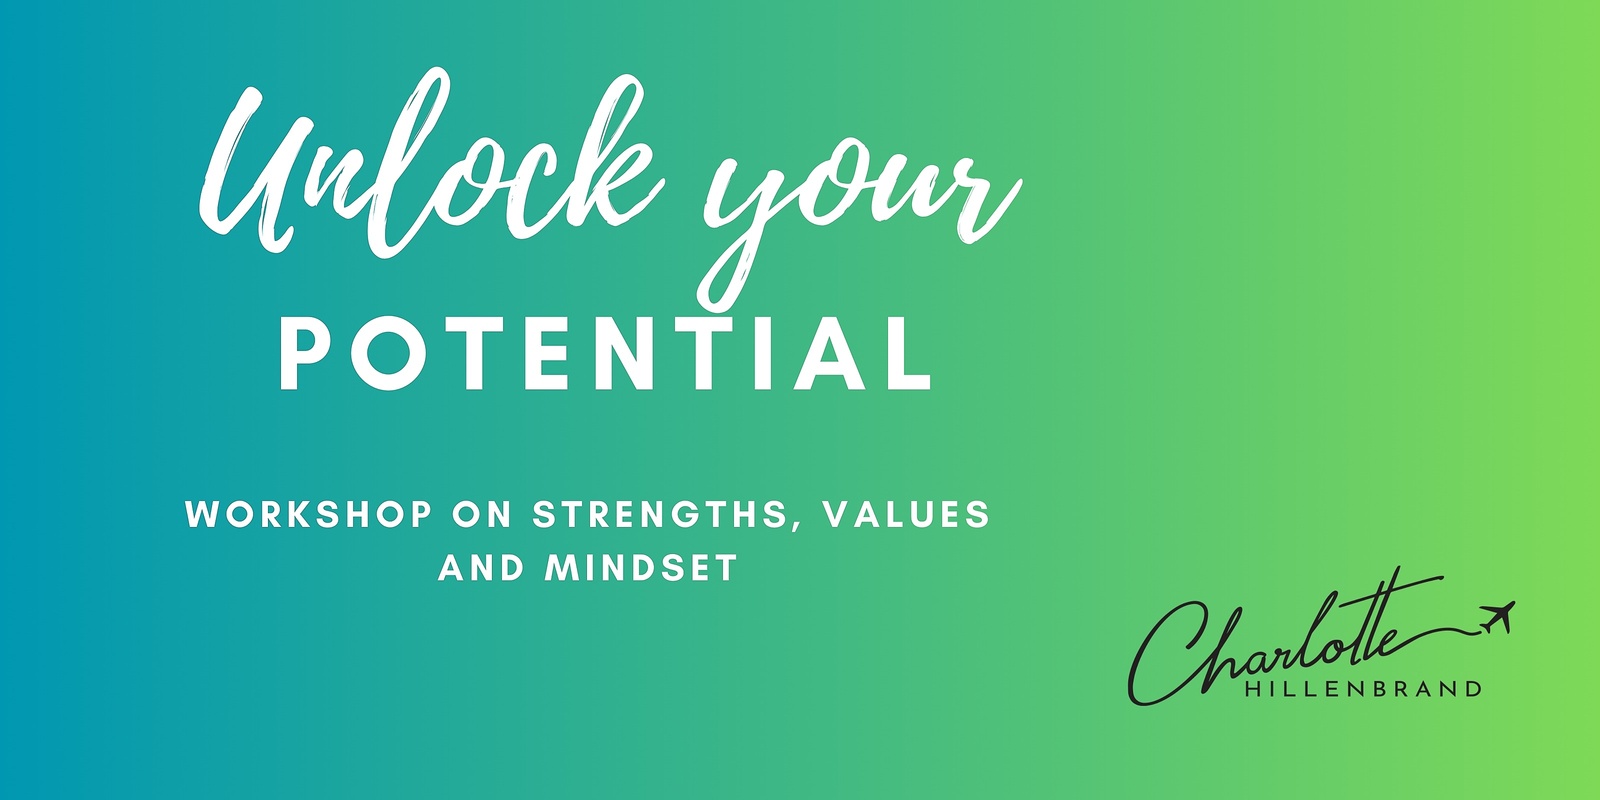 Banner image for Unlock your potential - a workshop series on strengths, values and mindset